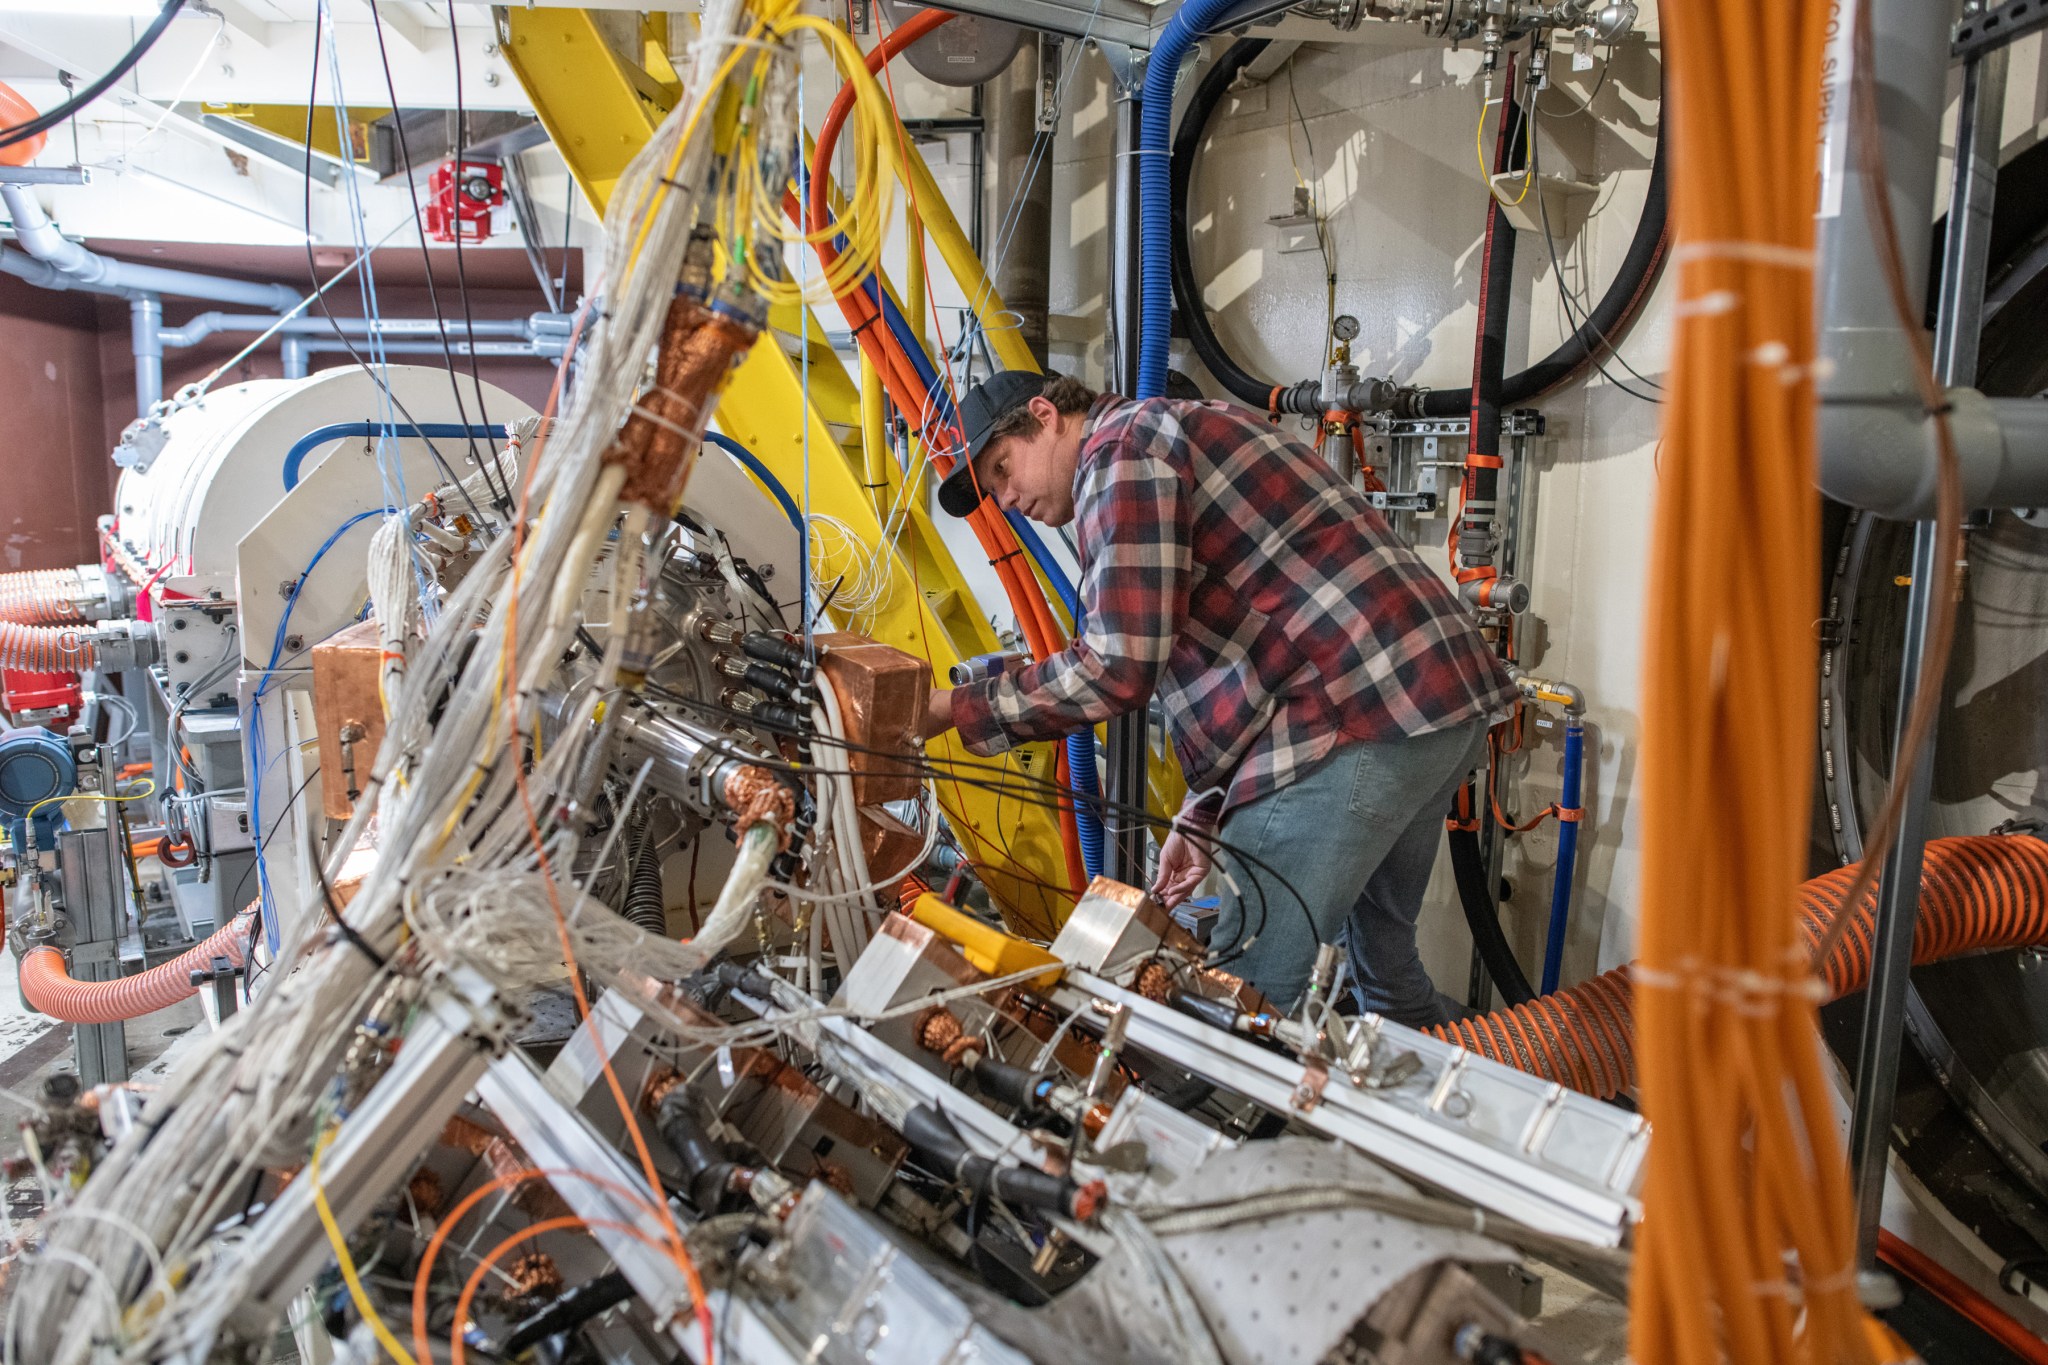 A man in a flannel shirt and jeans accesses a control panel in a room full of wires, cables, and other equipment. He sets up an electric engine for altitude tests that will eventually become part of a hybrid electric aircraft propulsion system.